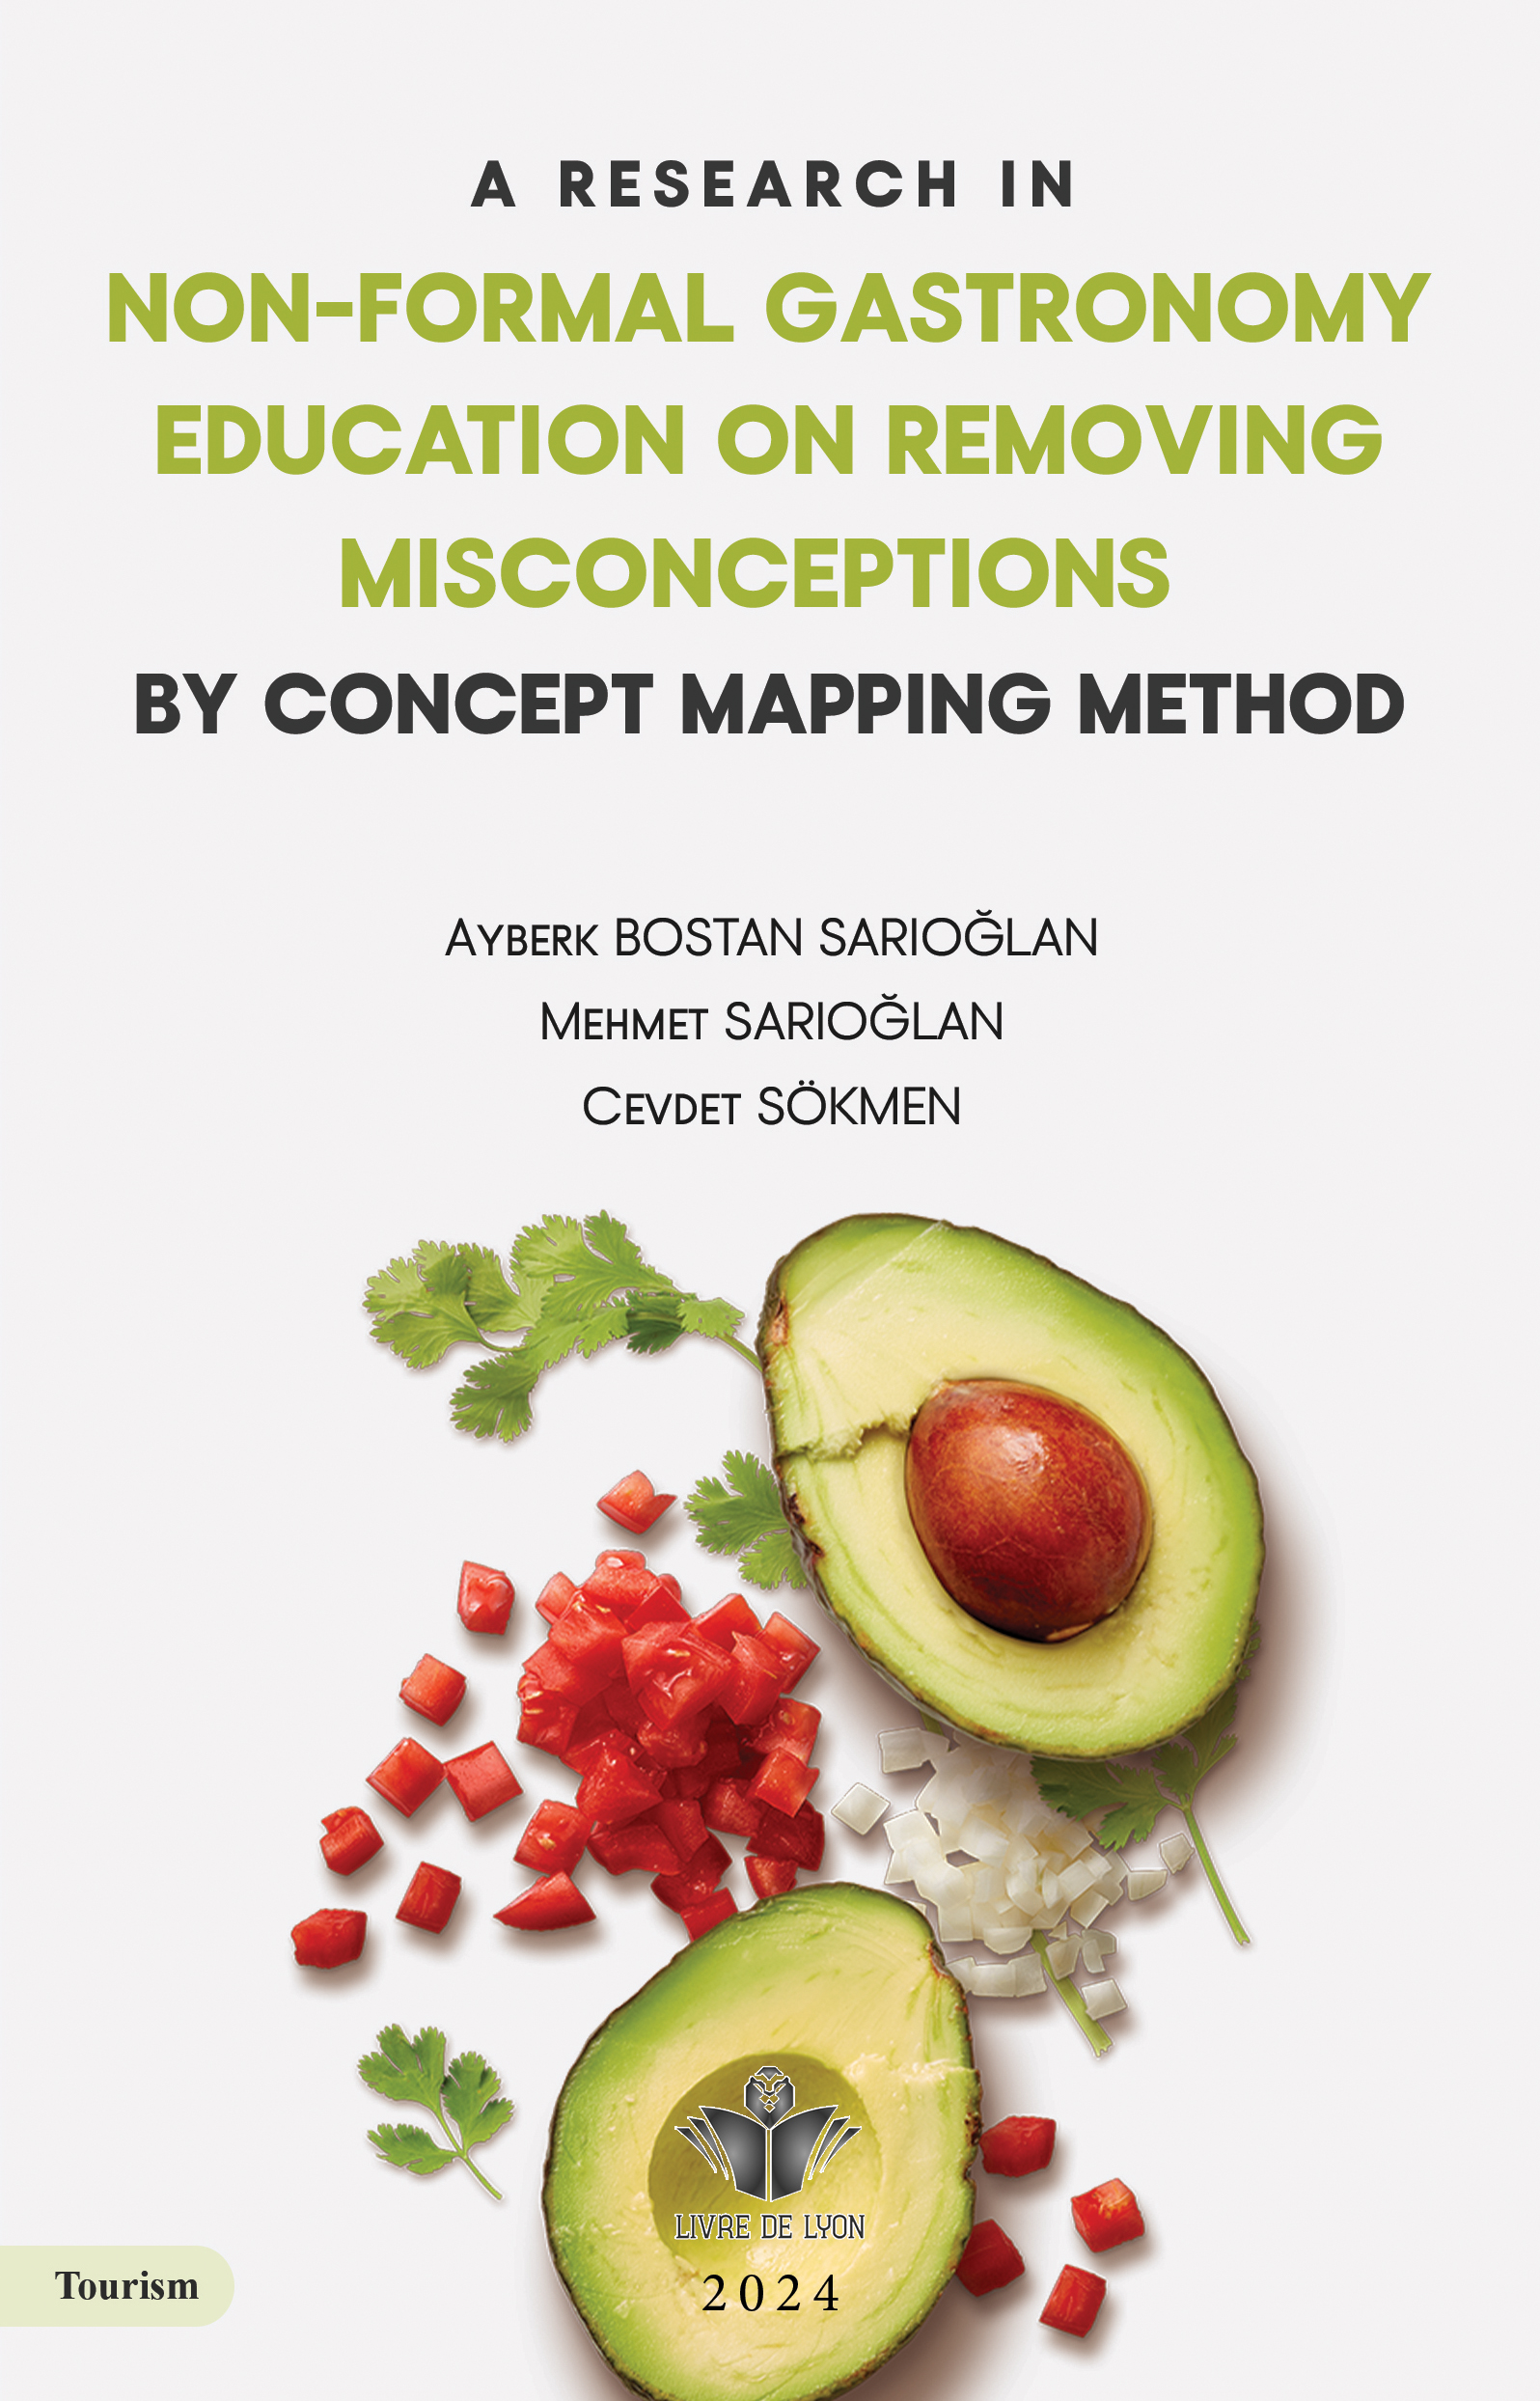 A Research in Non-Formal Gastronomy Education on Removing Misconceptions by Concept Mapping Method